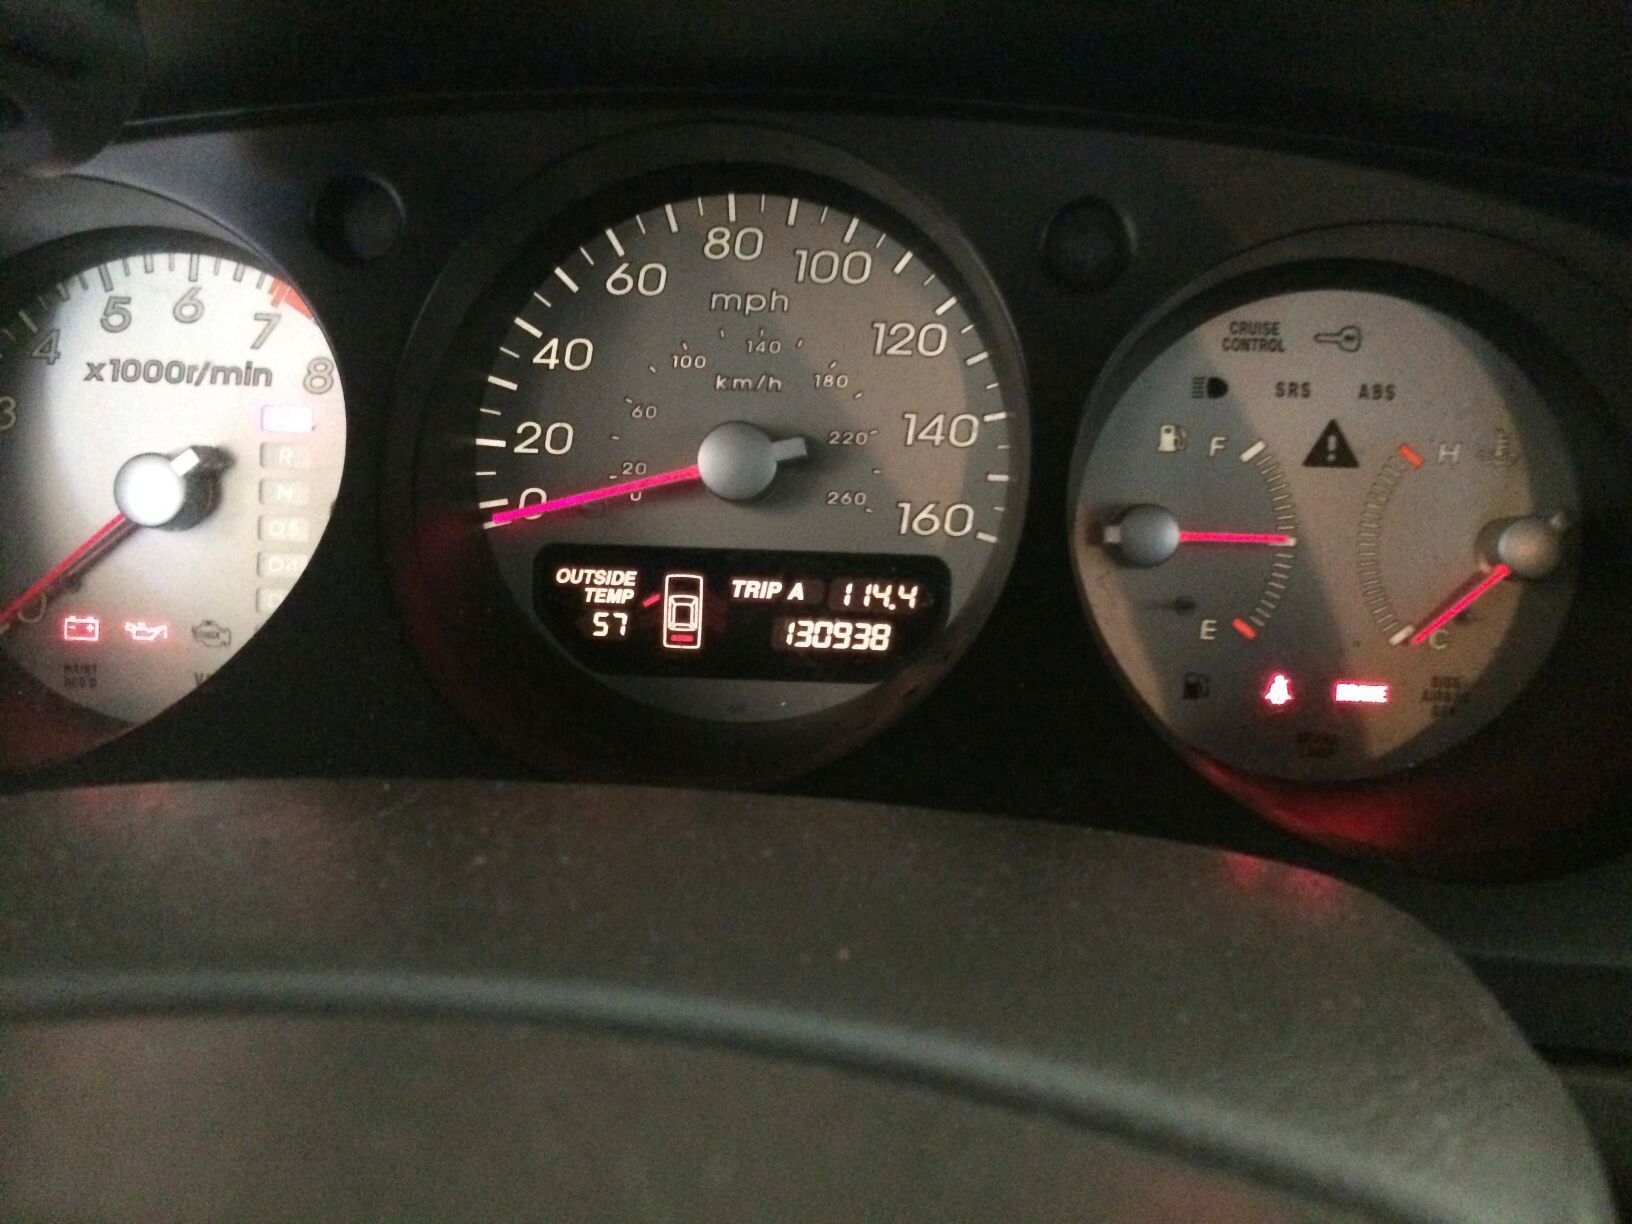 ACURA TSX COMMON PROBLEMS DASHBOARD DASH INSTRUMENT CLUSTER LIGHTS NOT WORKING